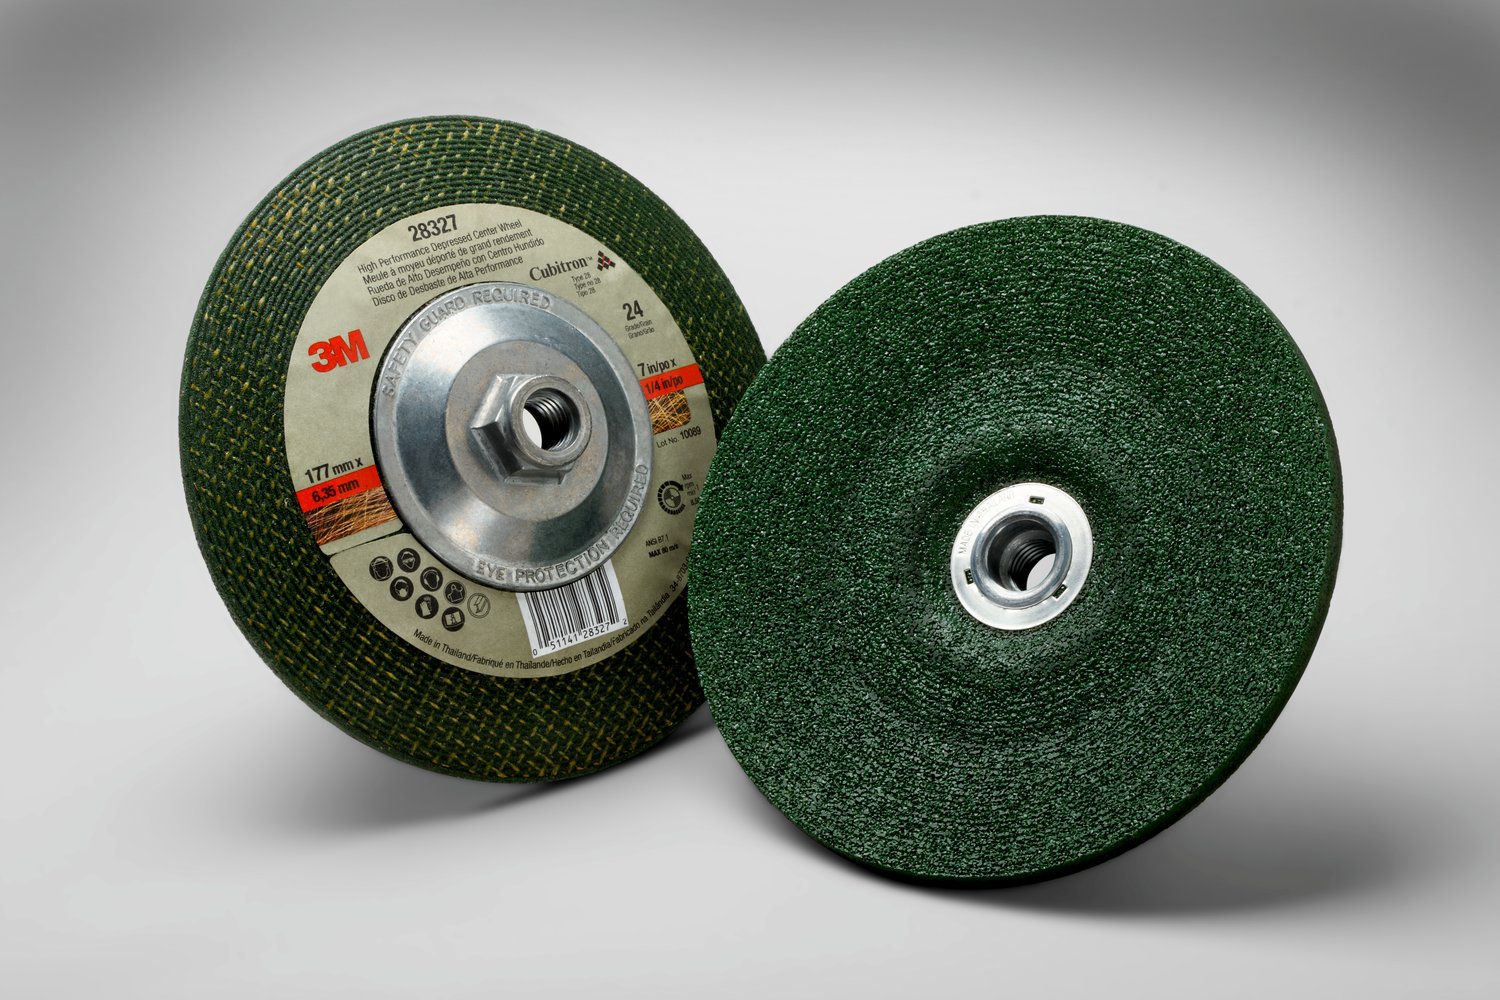 7010325732 - 3M Green Corps Depressed Center Grinding Wheel, T27, 24, 9 in x 1/4 in
x 5/8 in-11 Internal, 10/Carton, 20 ea/Case